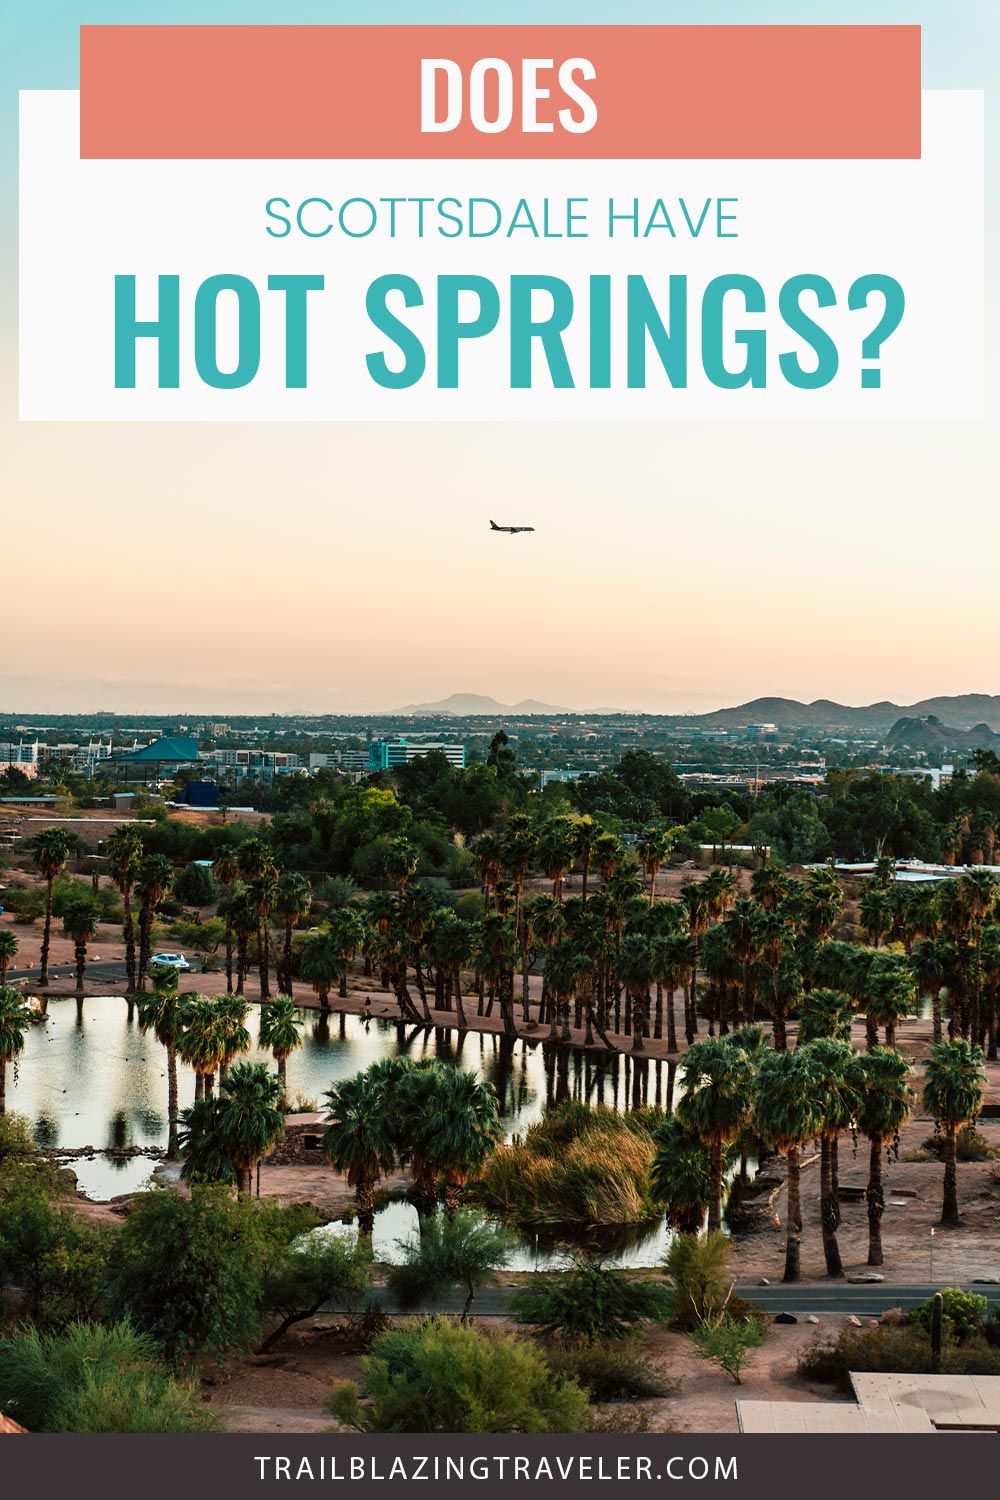 Trees and a lake - Does Scottsdale Have Hot Springs?